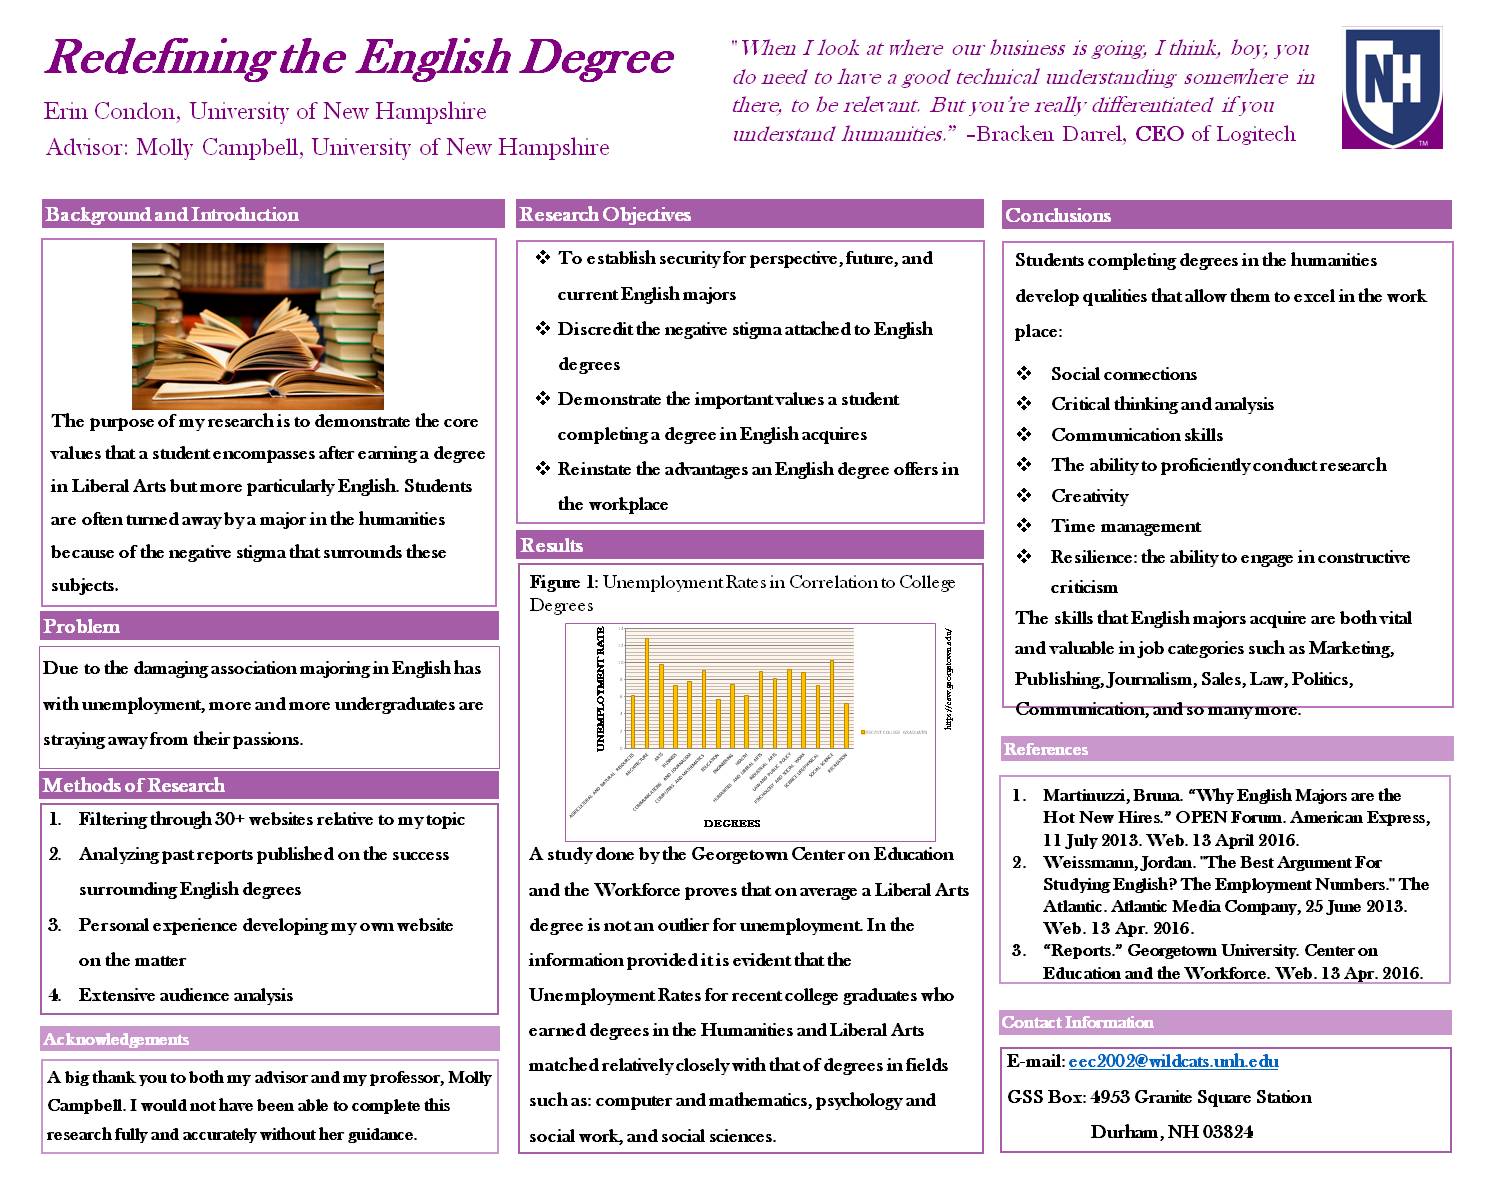 Redefining The English Degree by eec2002